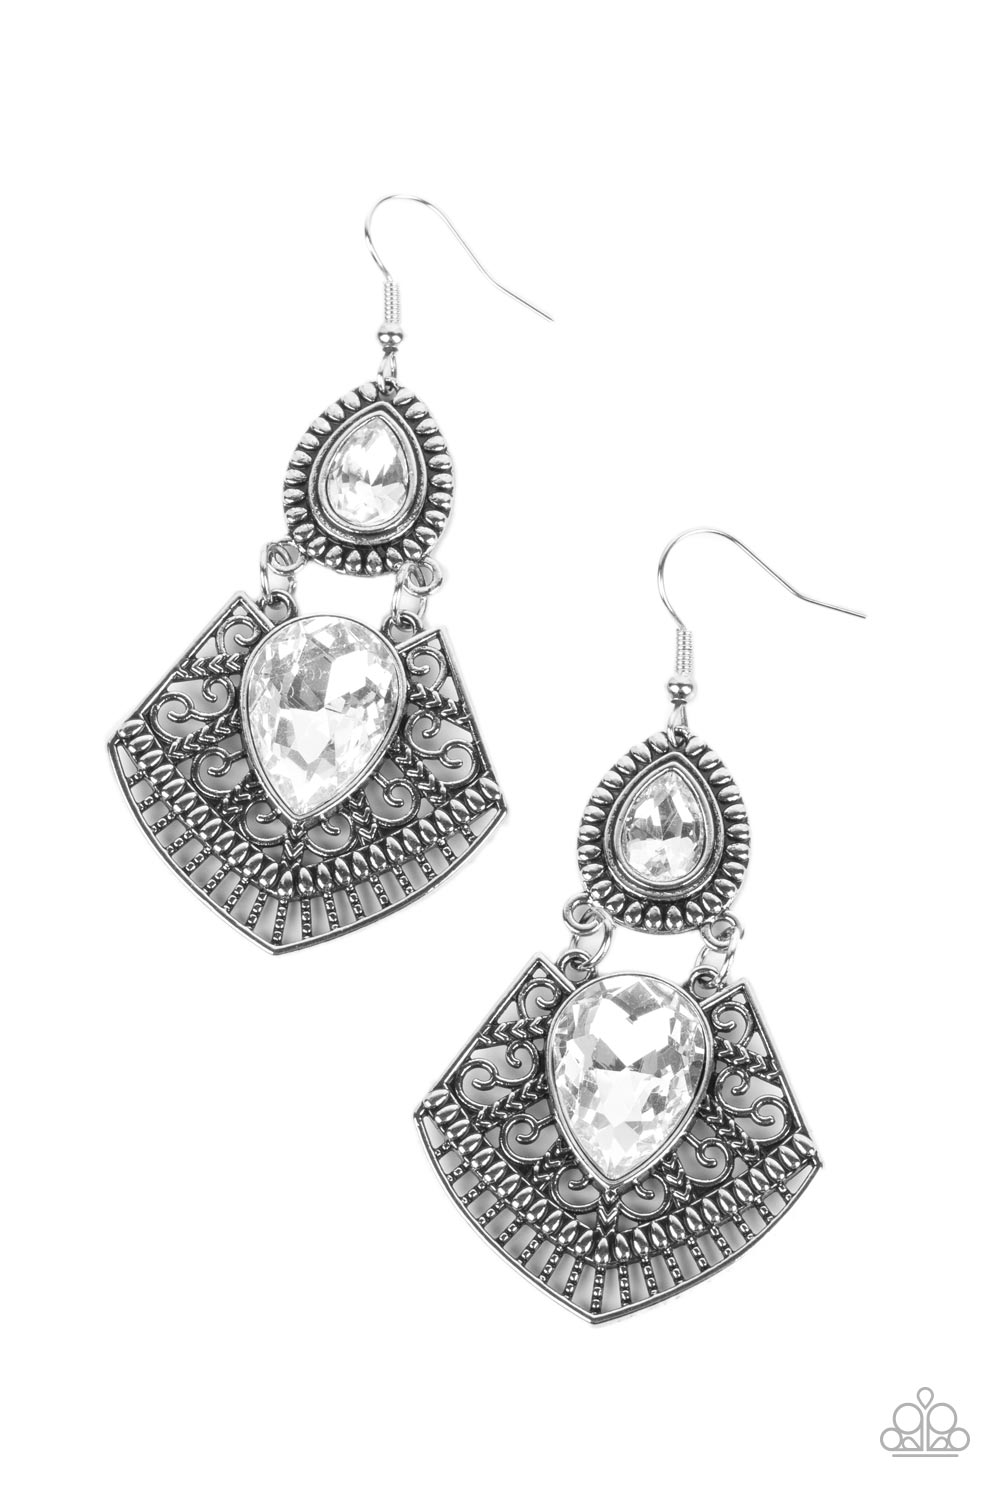 Royal Remix White Earring - Paparazzi Accessories  A white teardrop gem is pressed into a flared silver frame swirled in intricate patterns. The flared frame swings below a smaller white teardrop that is wrapped in a border of silver studs, creating a swinging statement. Earring attaches to a standard fishhook fitting.  Sold as one pair of earrings.  P5ST-WTXX-063XX